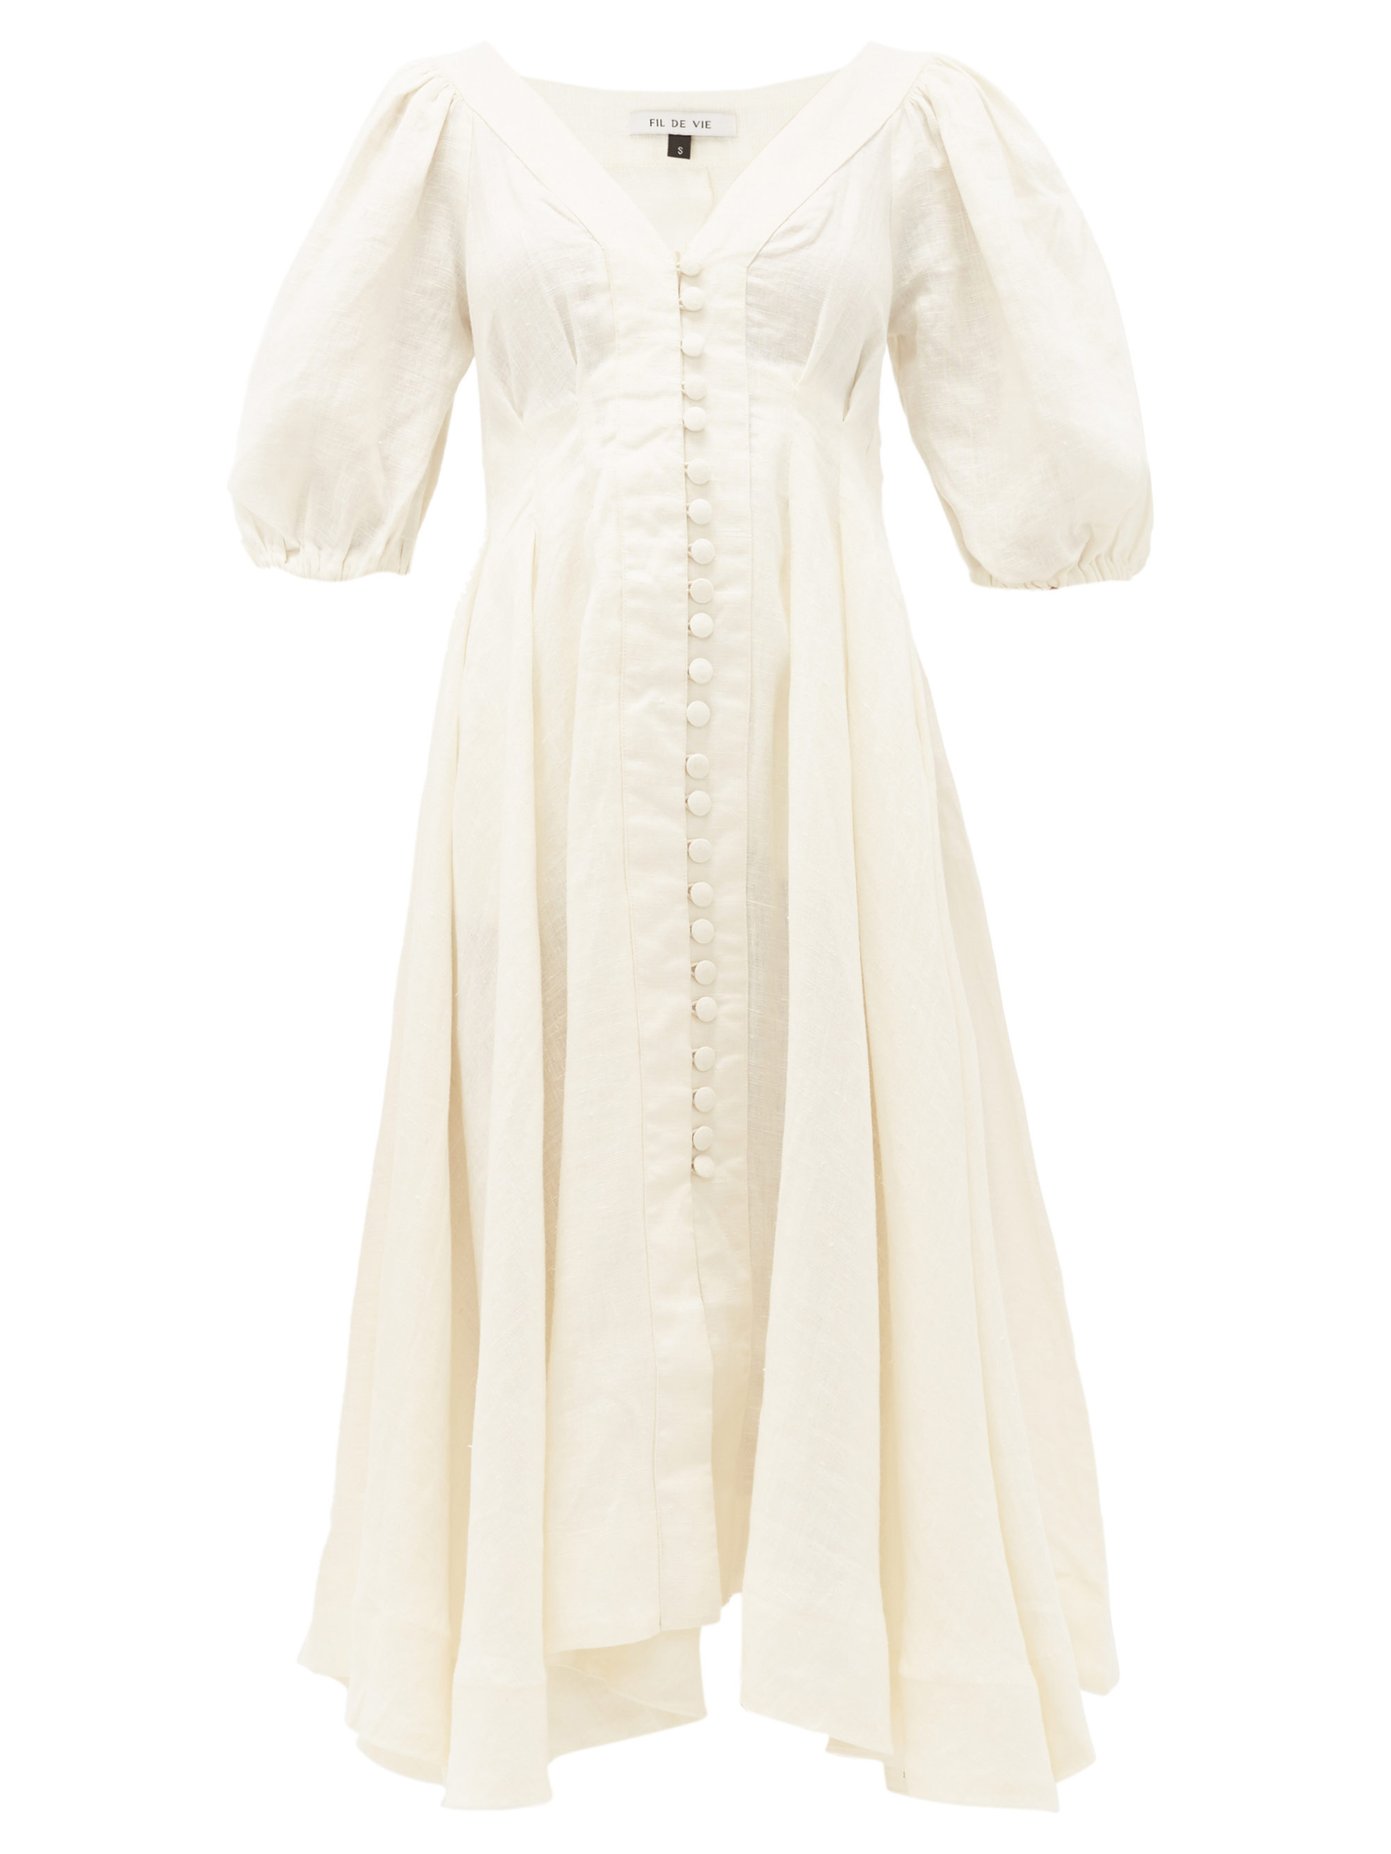 linen dress with sleeves uk